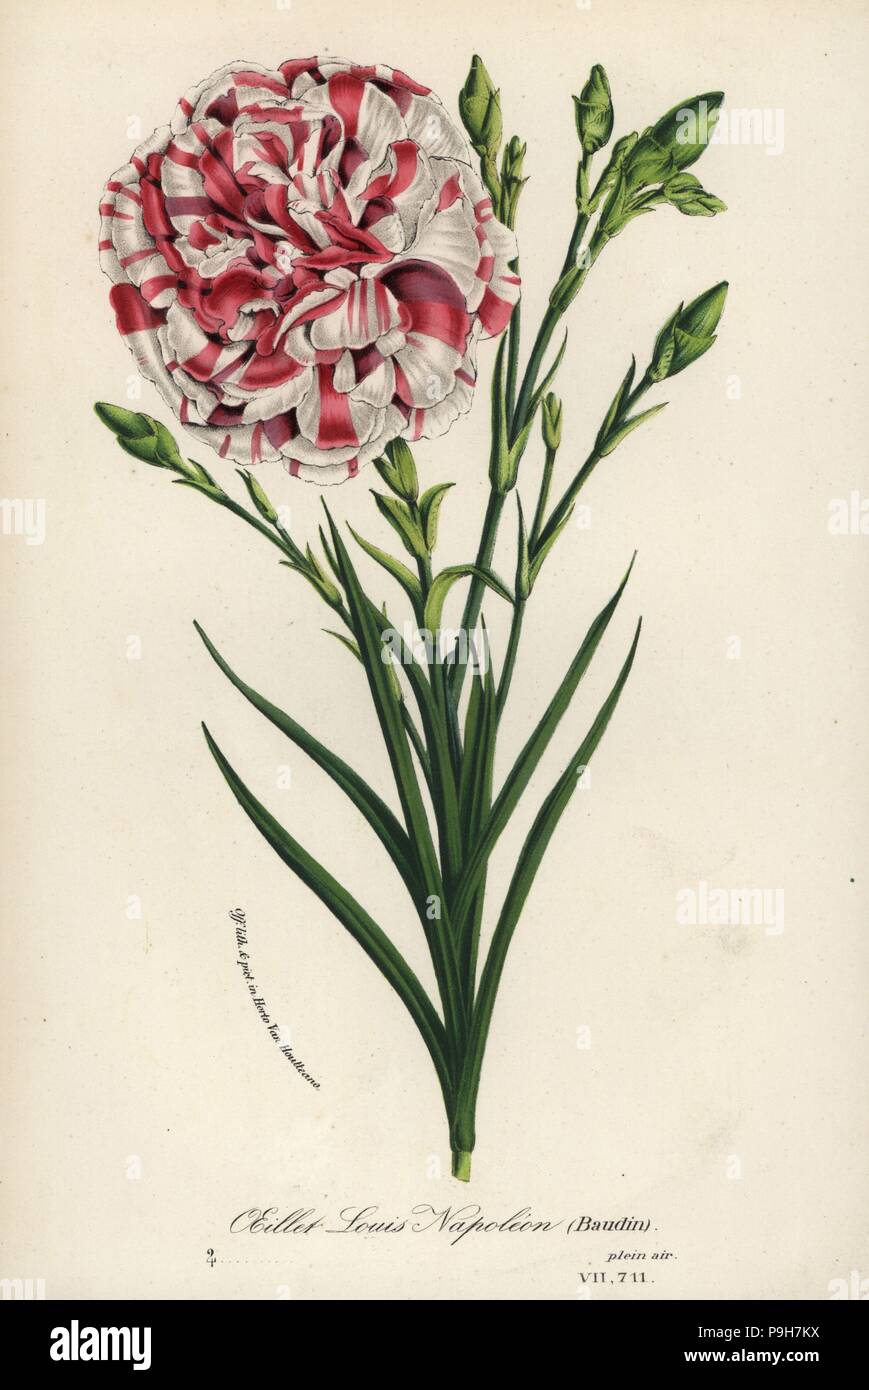 Oeillet Louis Napoleon carnation hybrid, Dianthus caryophyllus. Handcoloured lithograph from Louis van Houtte and Charles Lemaire's Flowers of the Gardens and Hothouses of Europe, Flore des Serres et des Jardins de l'Europe, Ghent, Belgium, 1867-1868. Stock Photo